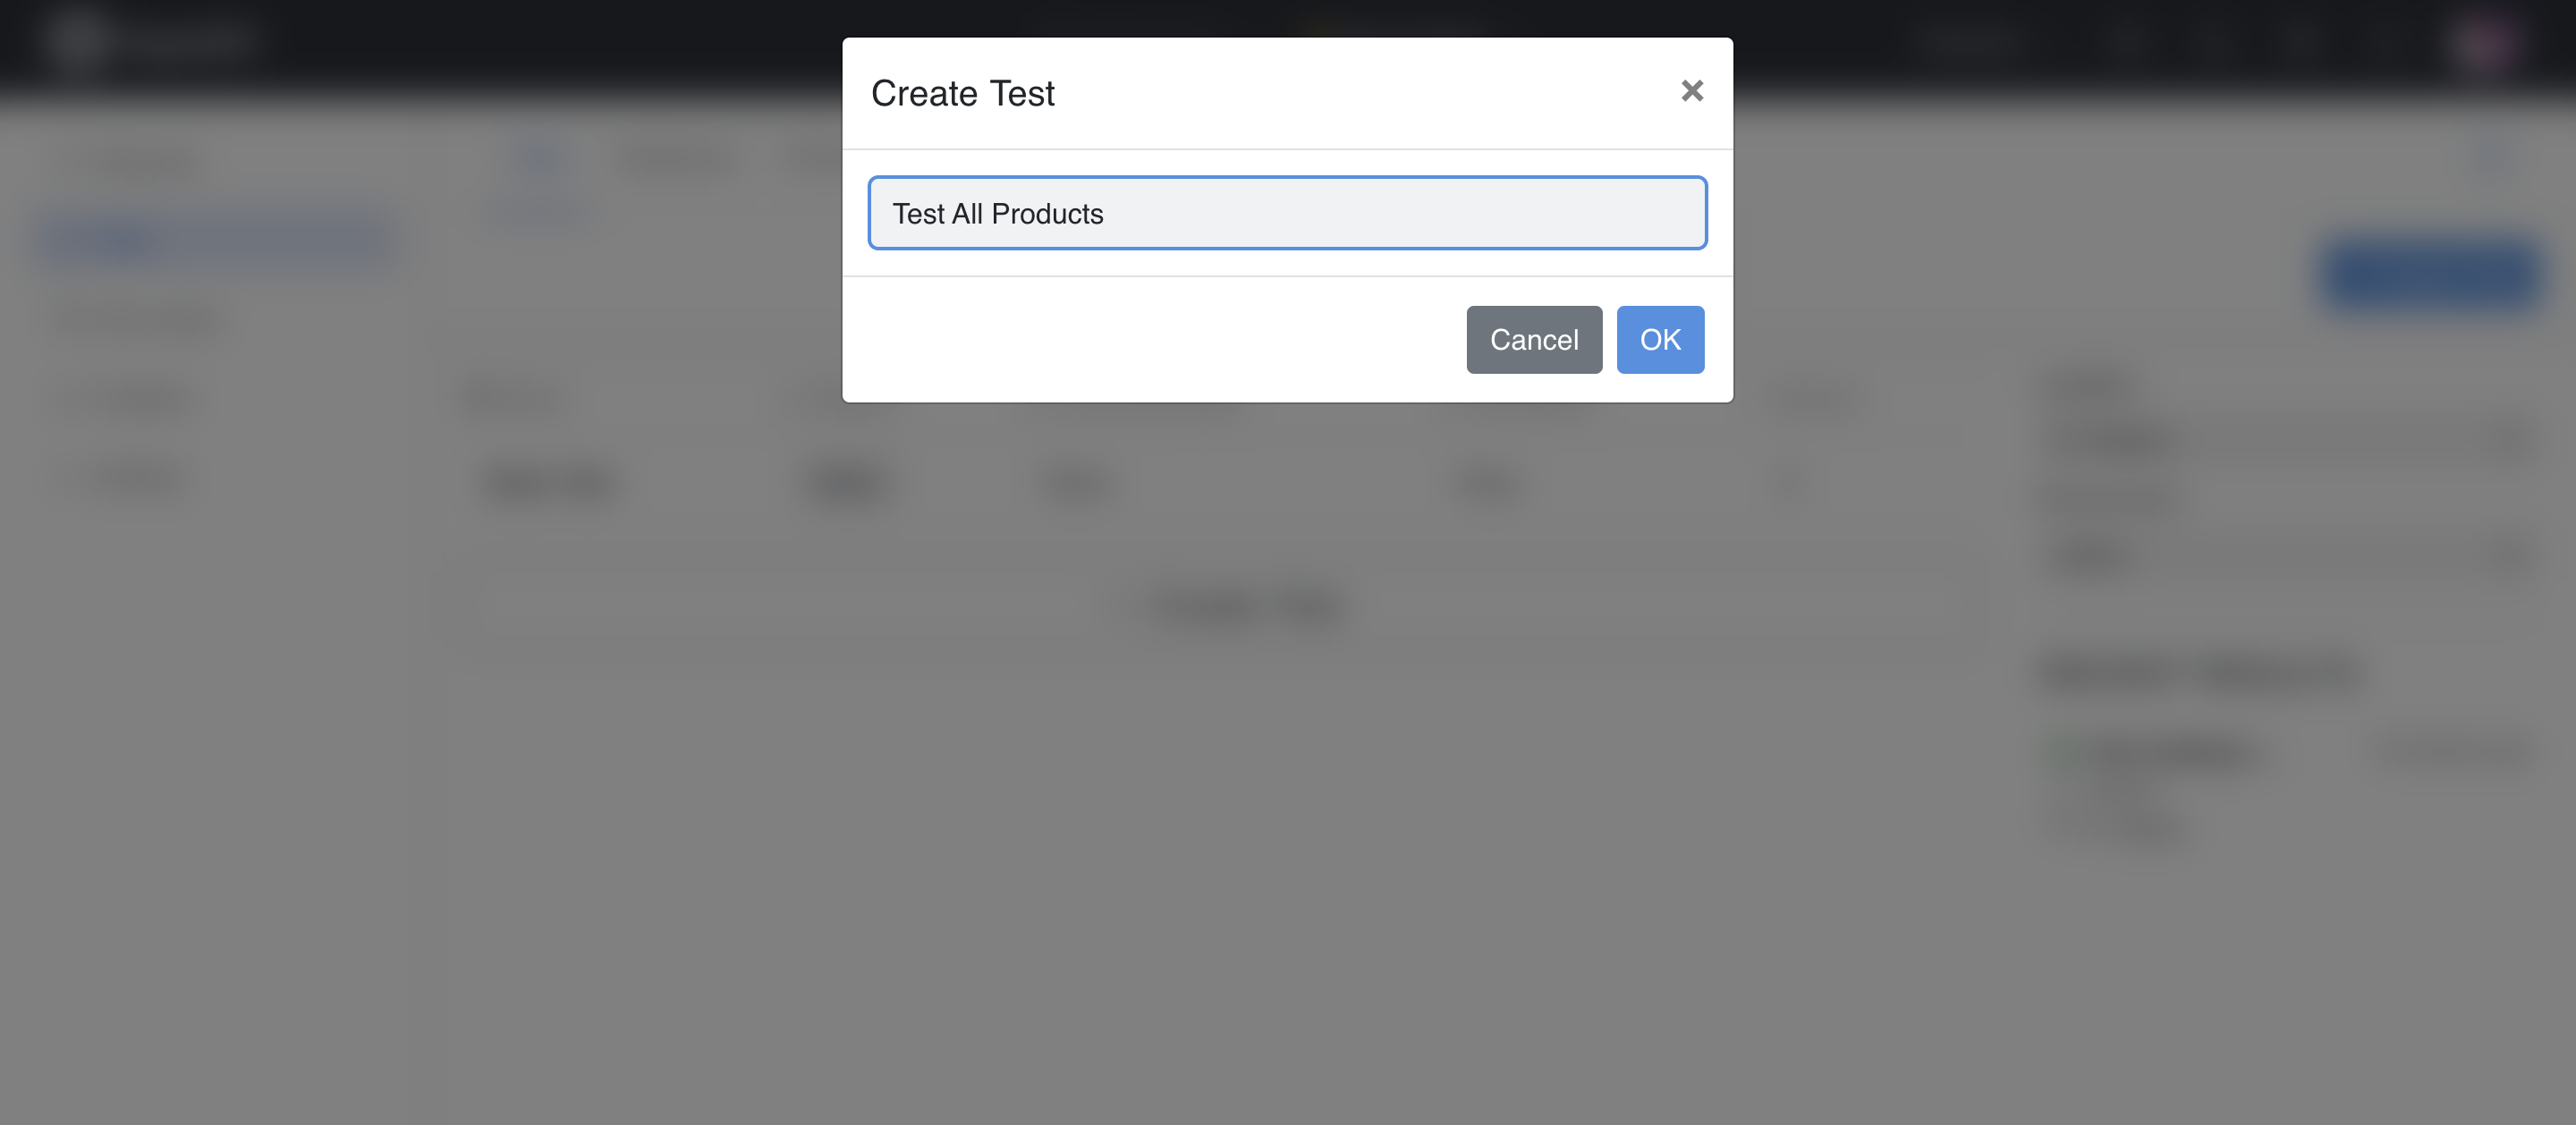 Creating a New Test